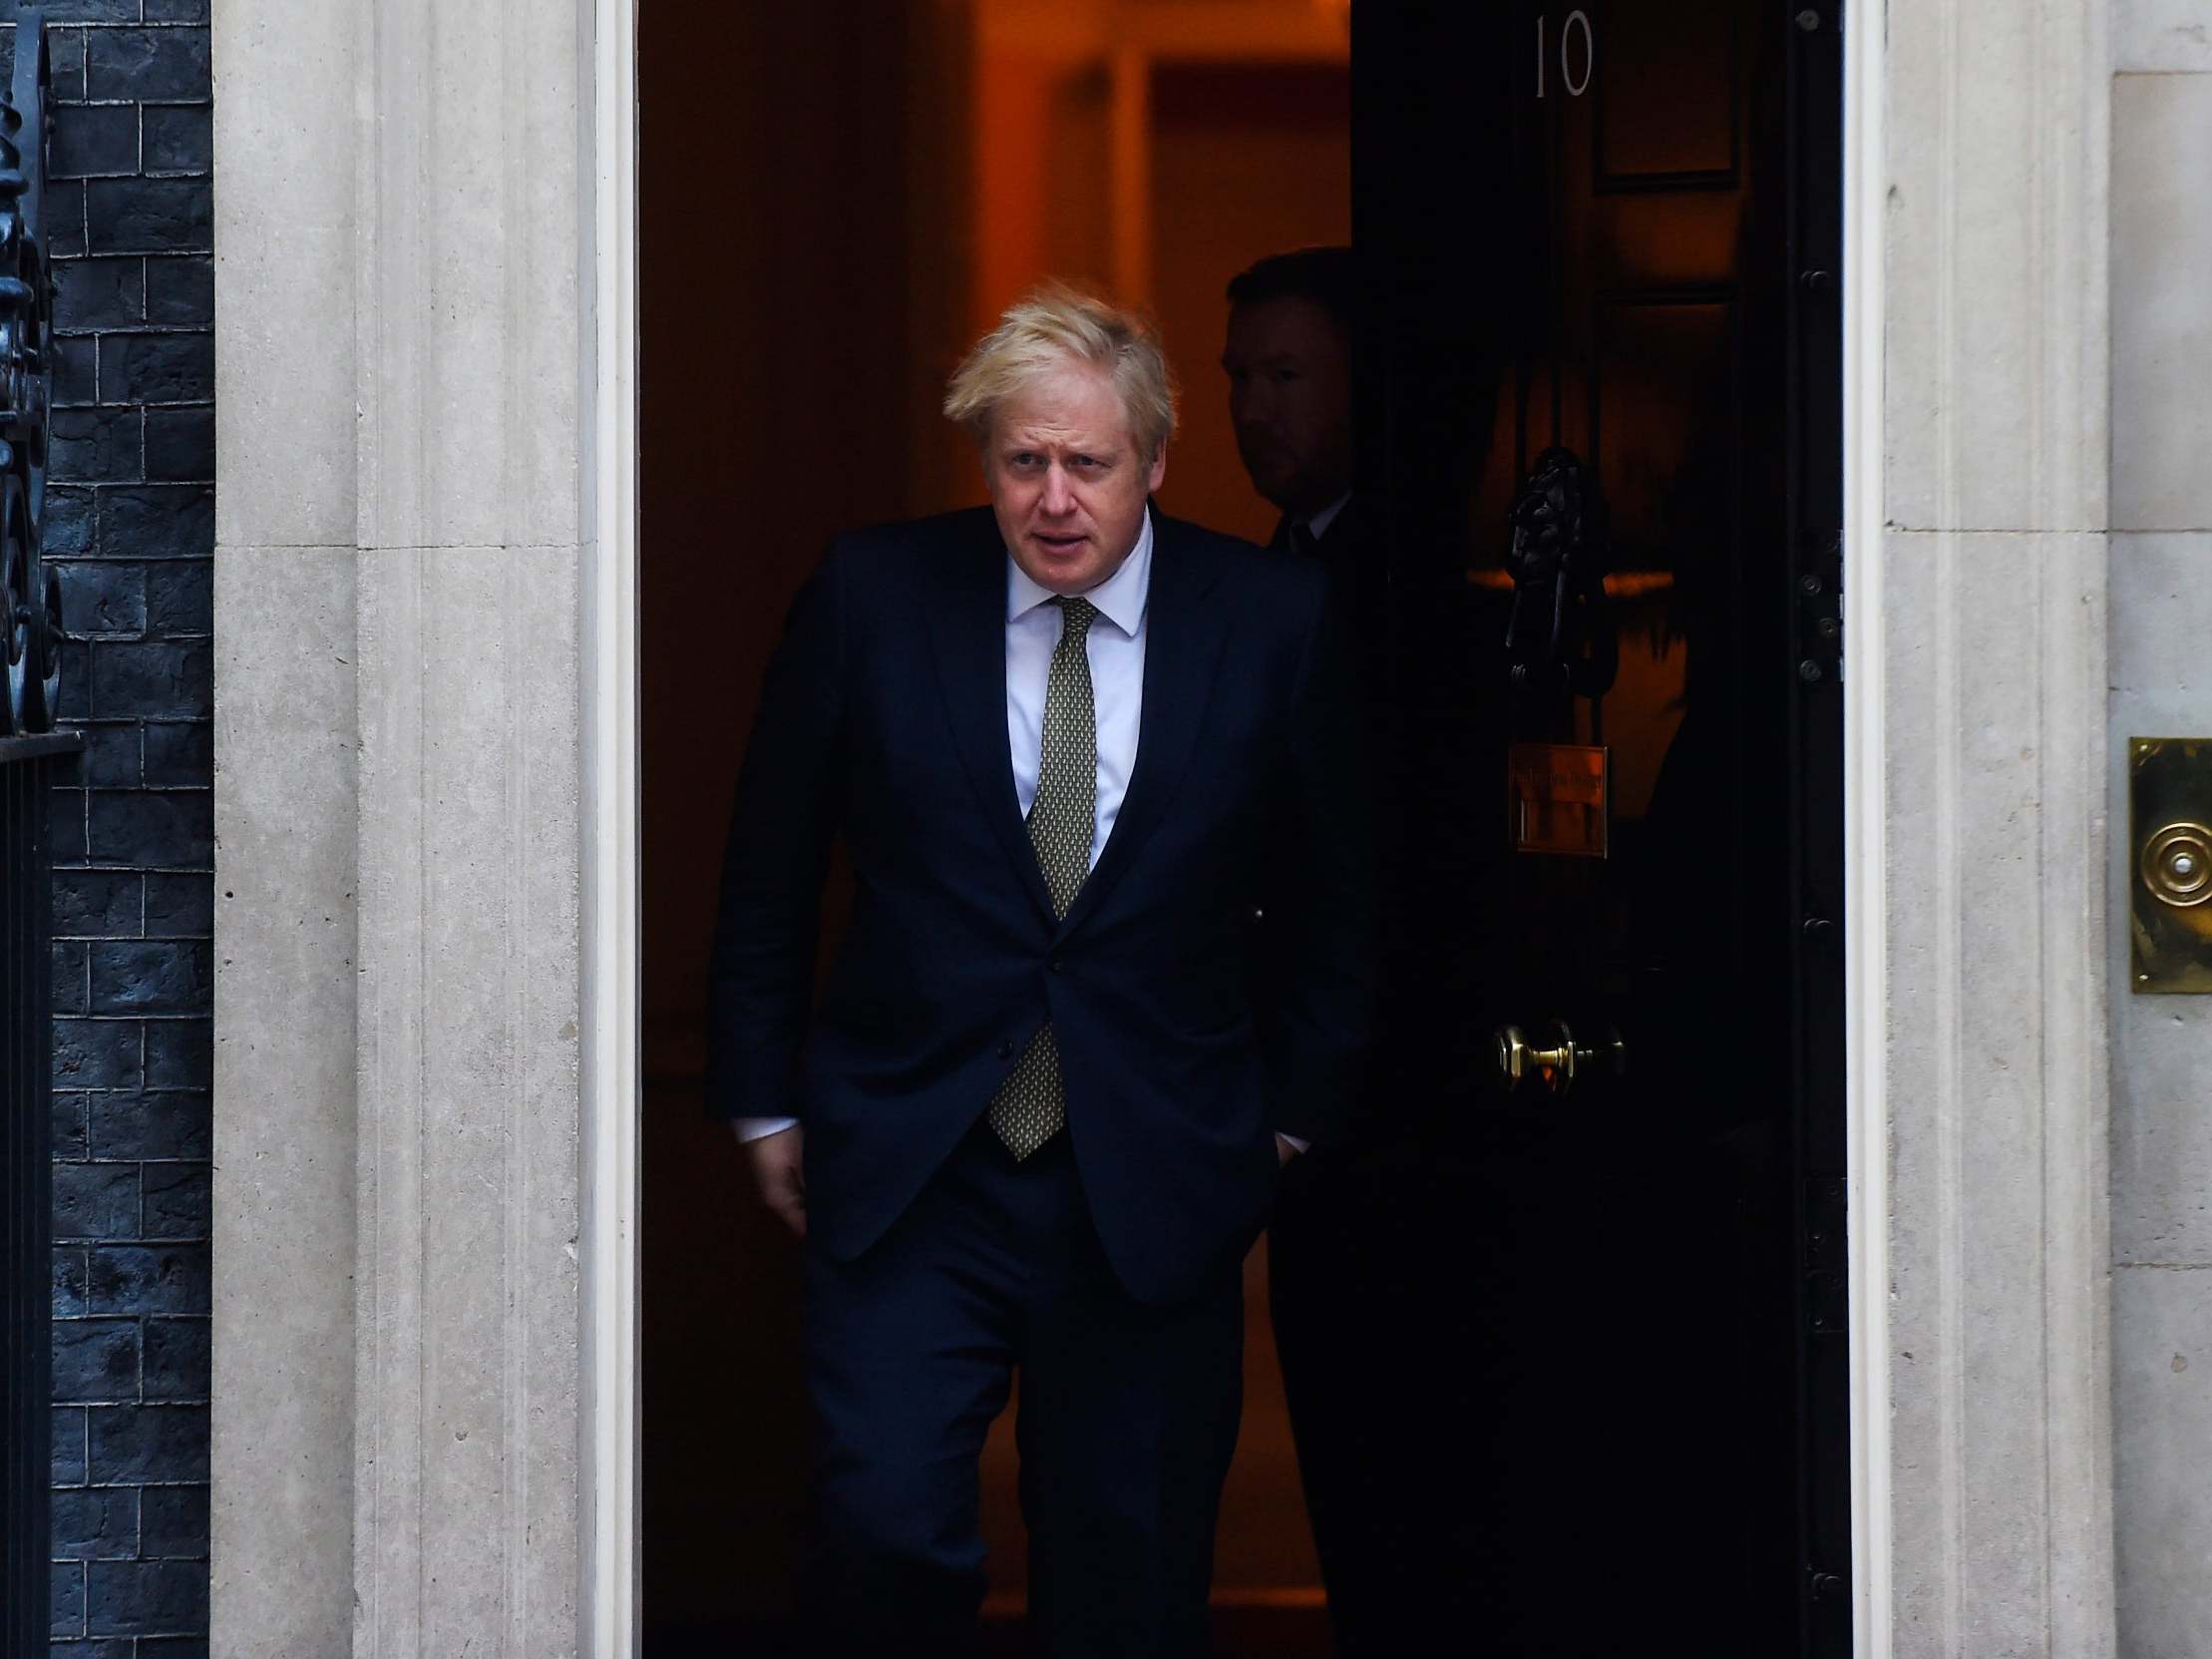 Johnson’s promises have been dismissed by independent advisers